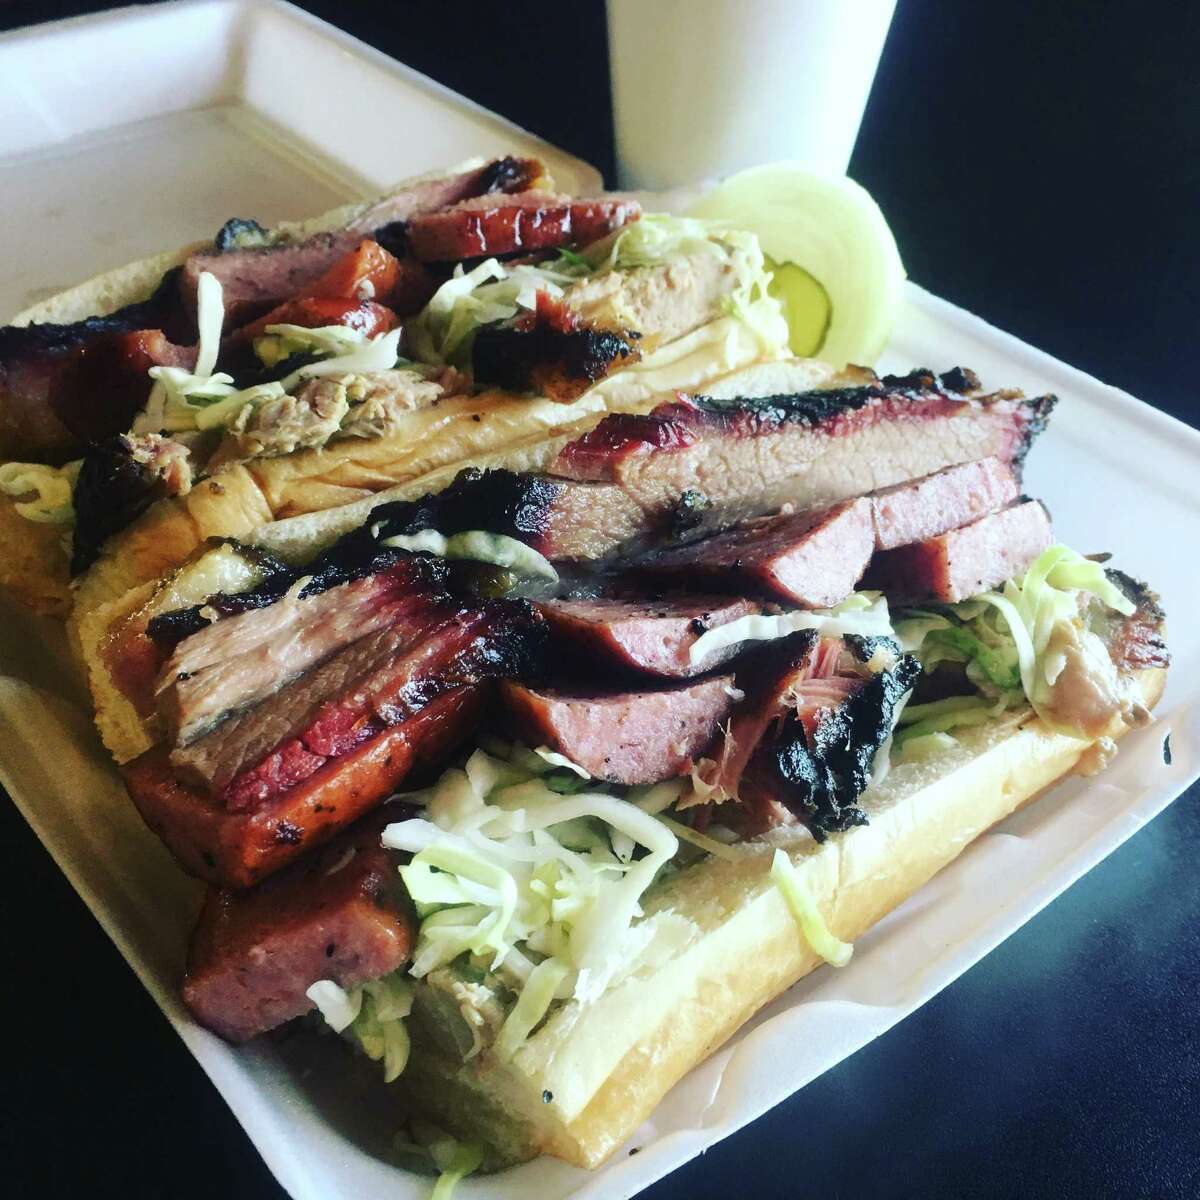 No free meals or T-shirts to the winner, but consuming the $17 “Big Smokey” would be one of San Antonio's biggest eating challenges. The 12-inch roll is layered with more than a pound of brisket, pork shoulder and sausage with marinated cabbage.